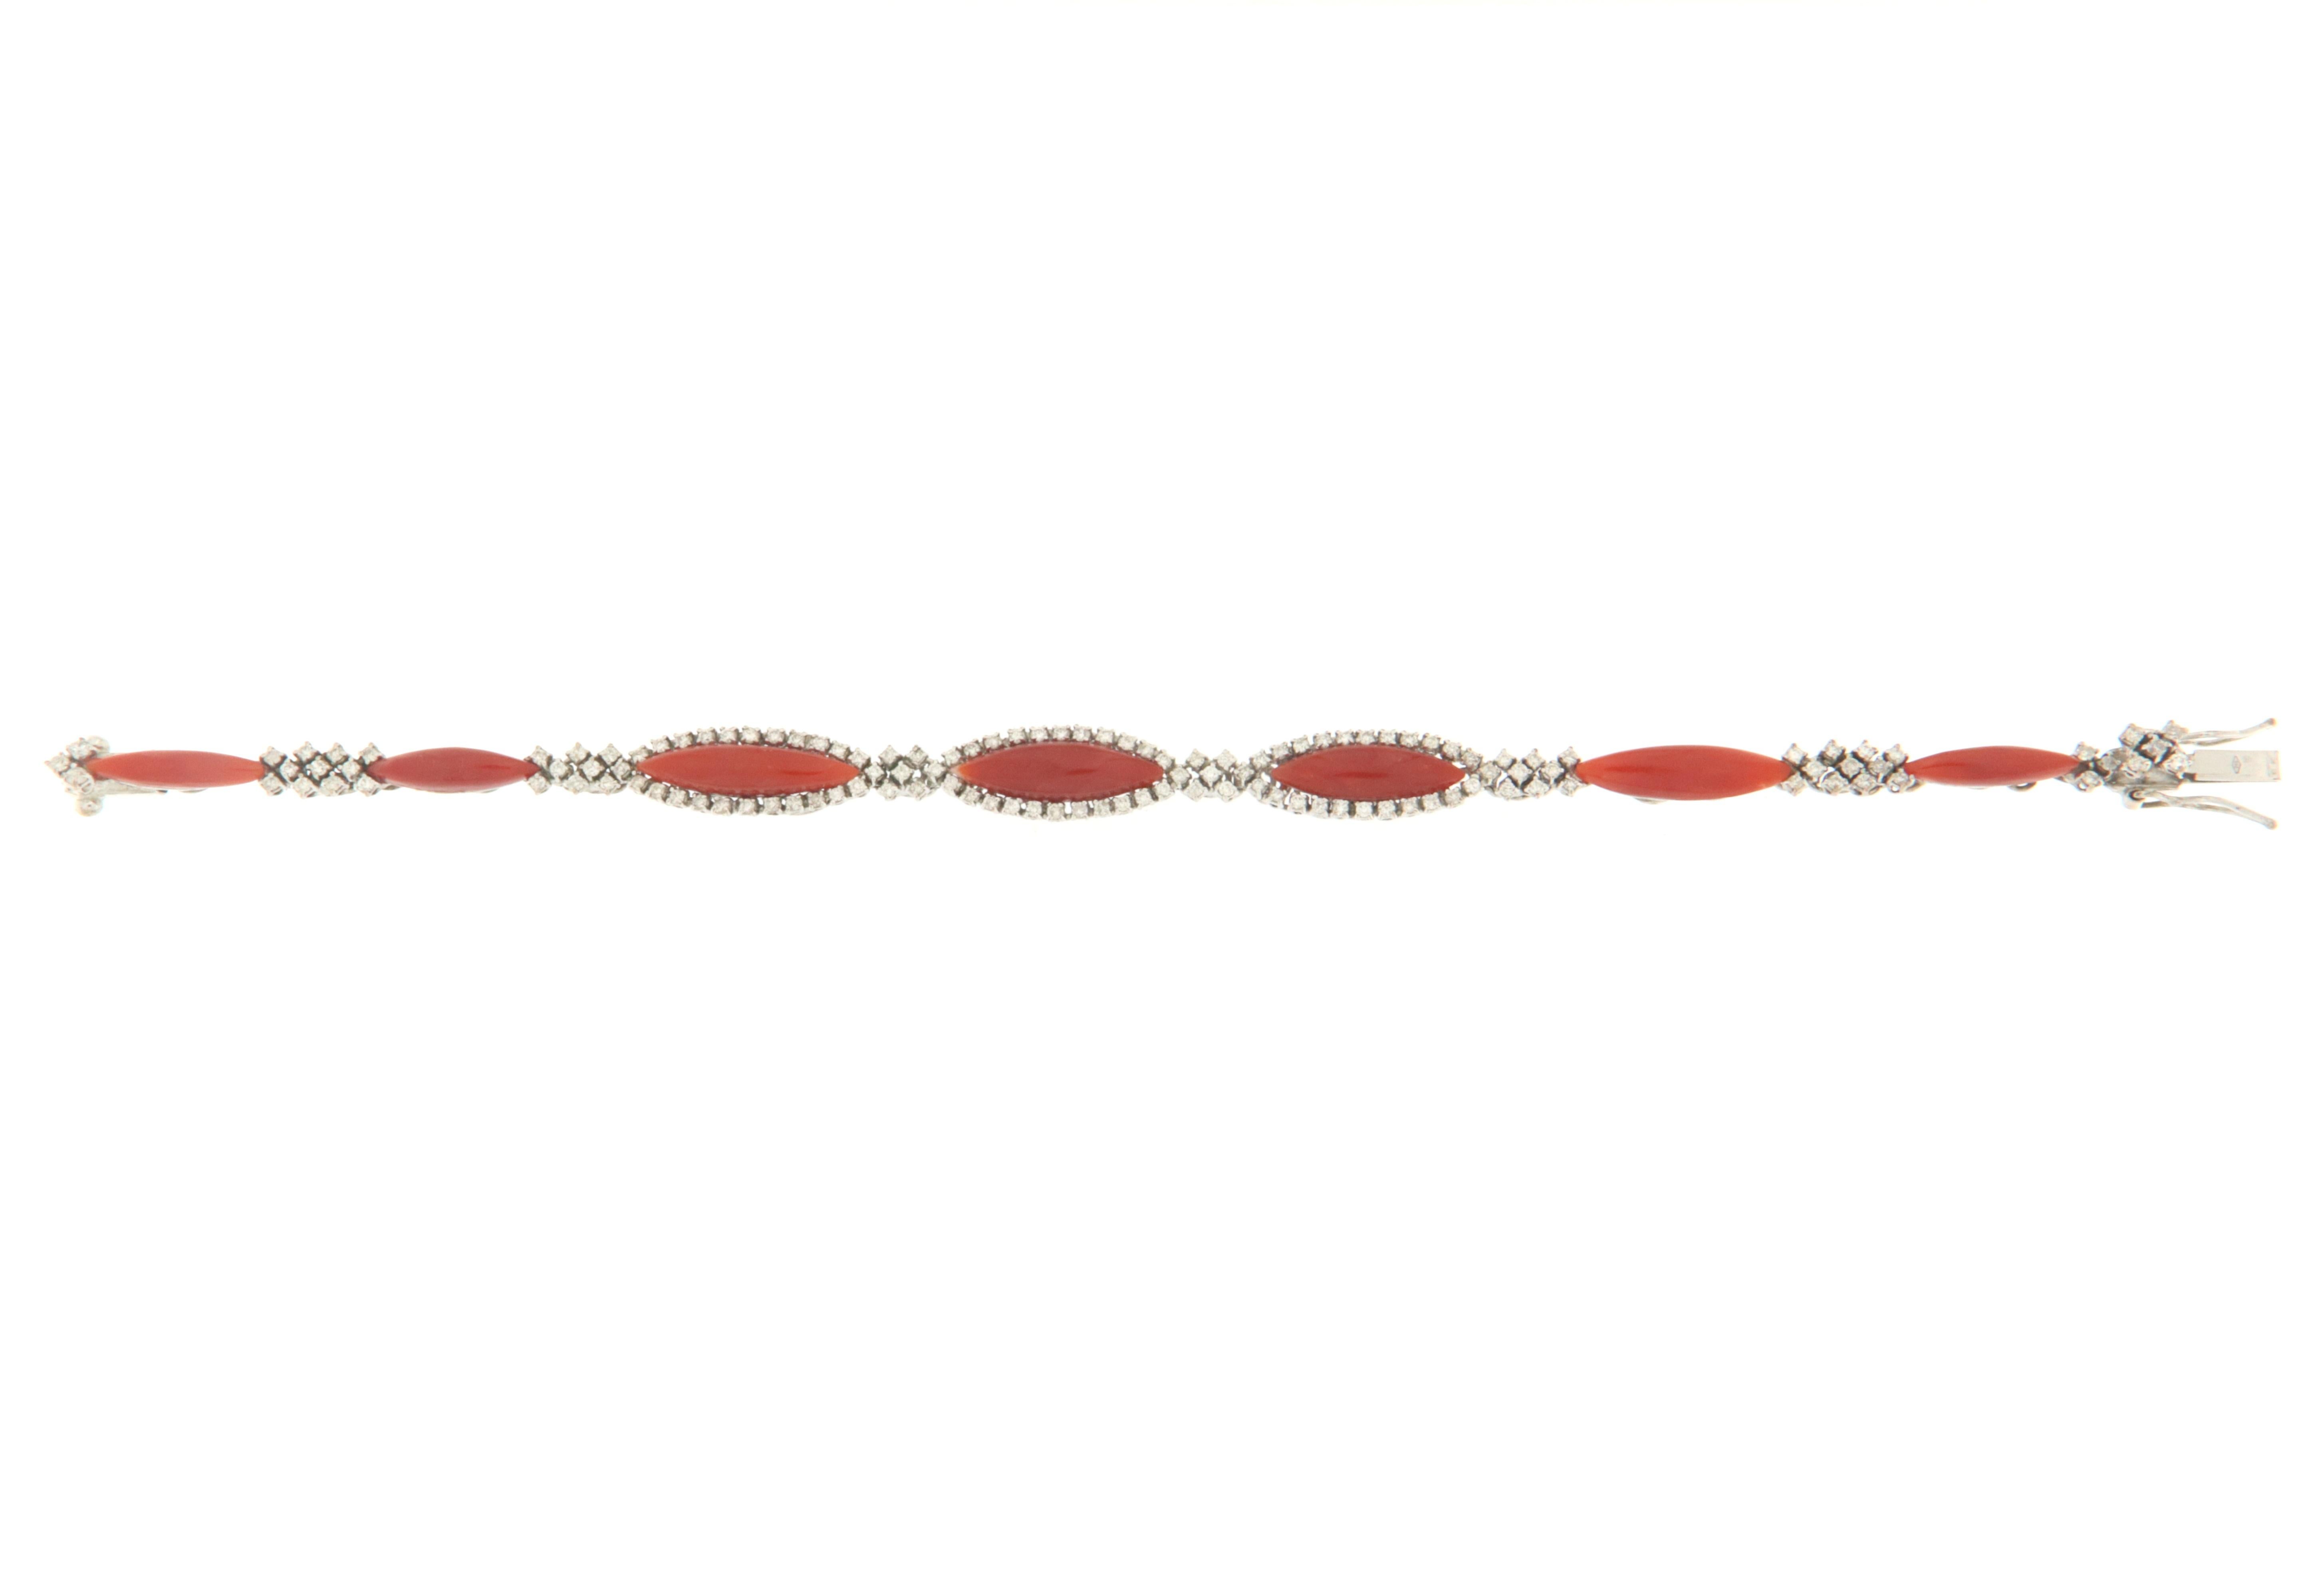 Fabulous 18 karat white gold cuff bracelet. Handmade by our artisans assembled with Sardinian coral and diamonds.
18 shuttles-cut corals from the Sardinian Sea. A bracelet suitable for any occasion to wear at any time of the year, a jewel that a